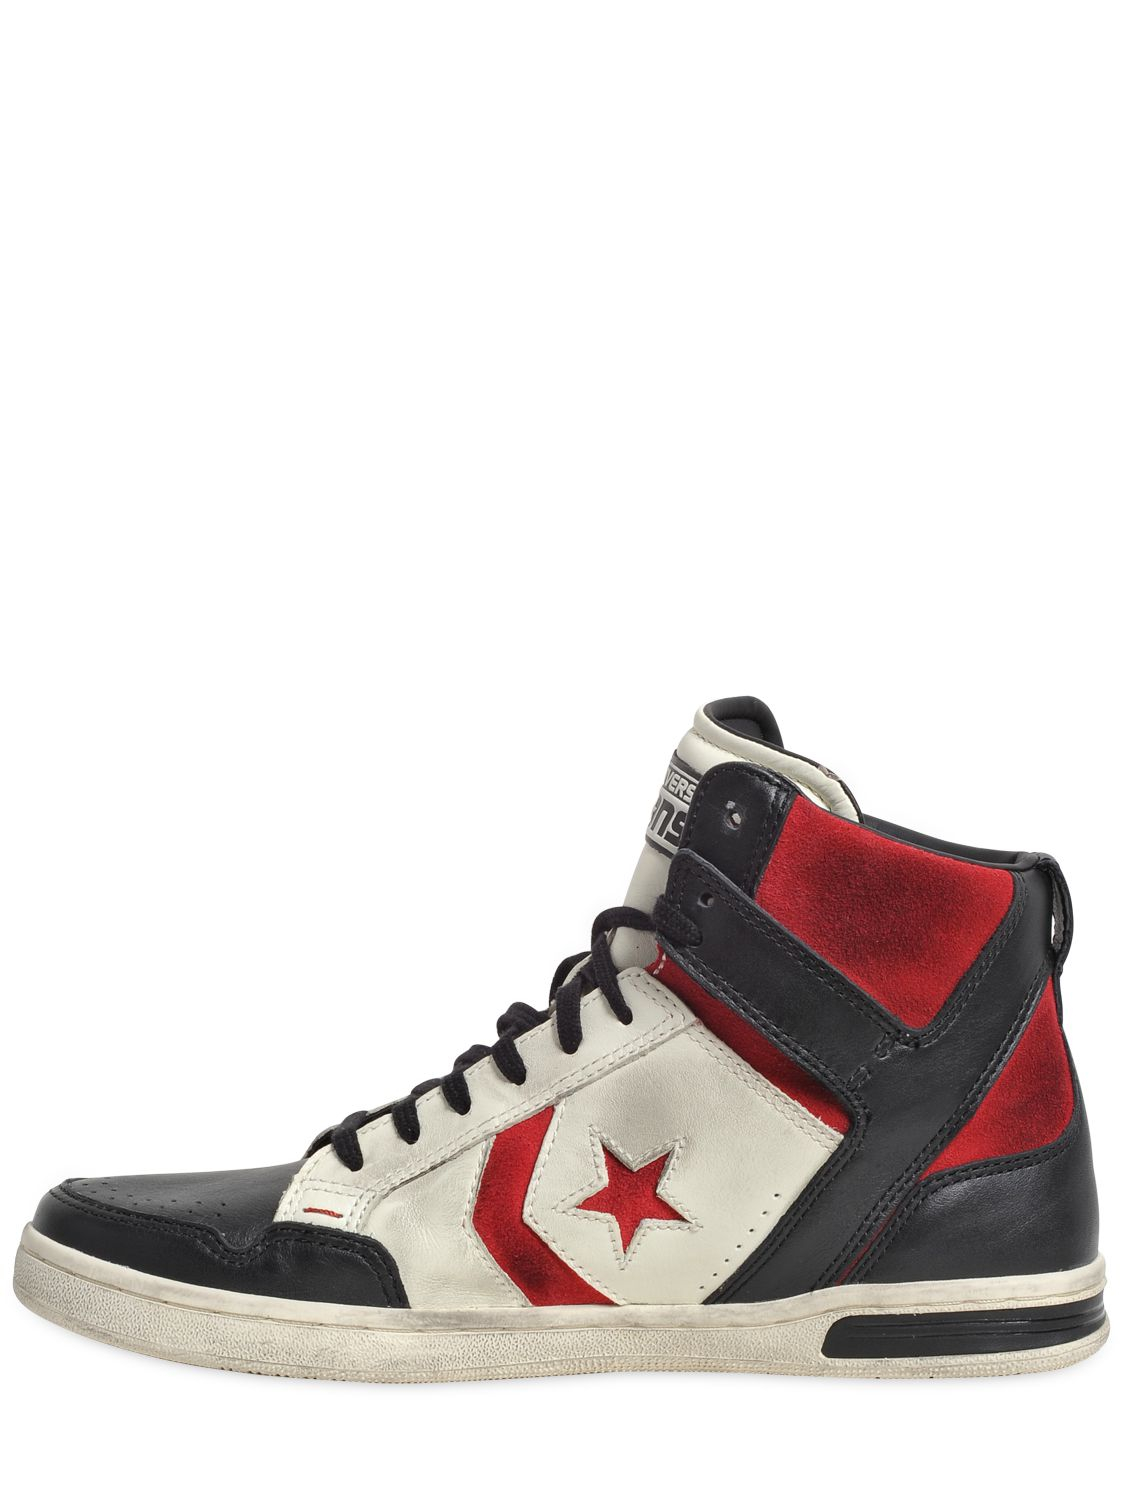 Converse Weapon Leather High Top Sneakers in White for Men | Lyst زيت البرتقال